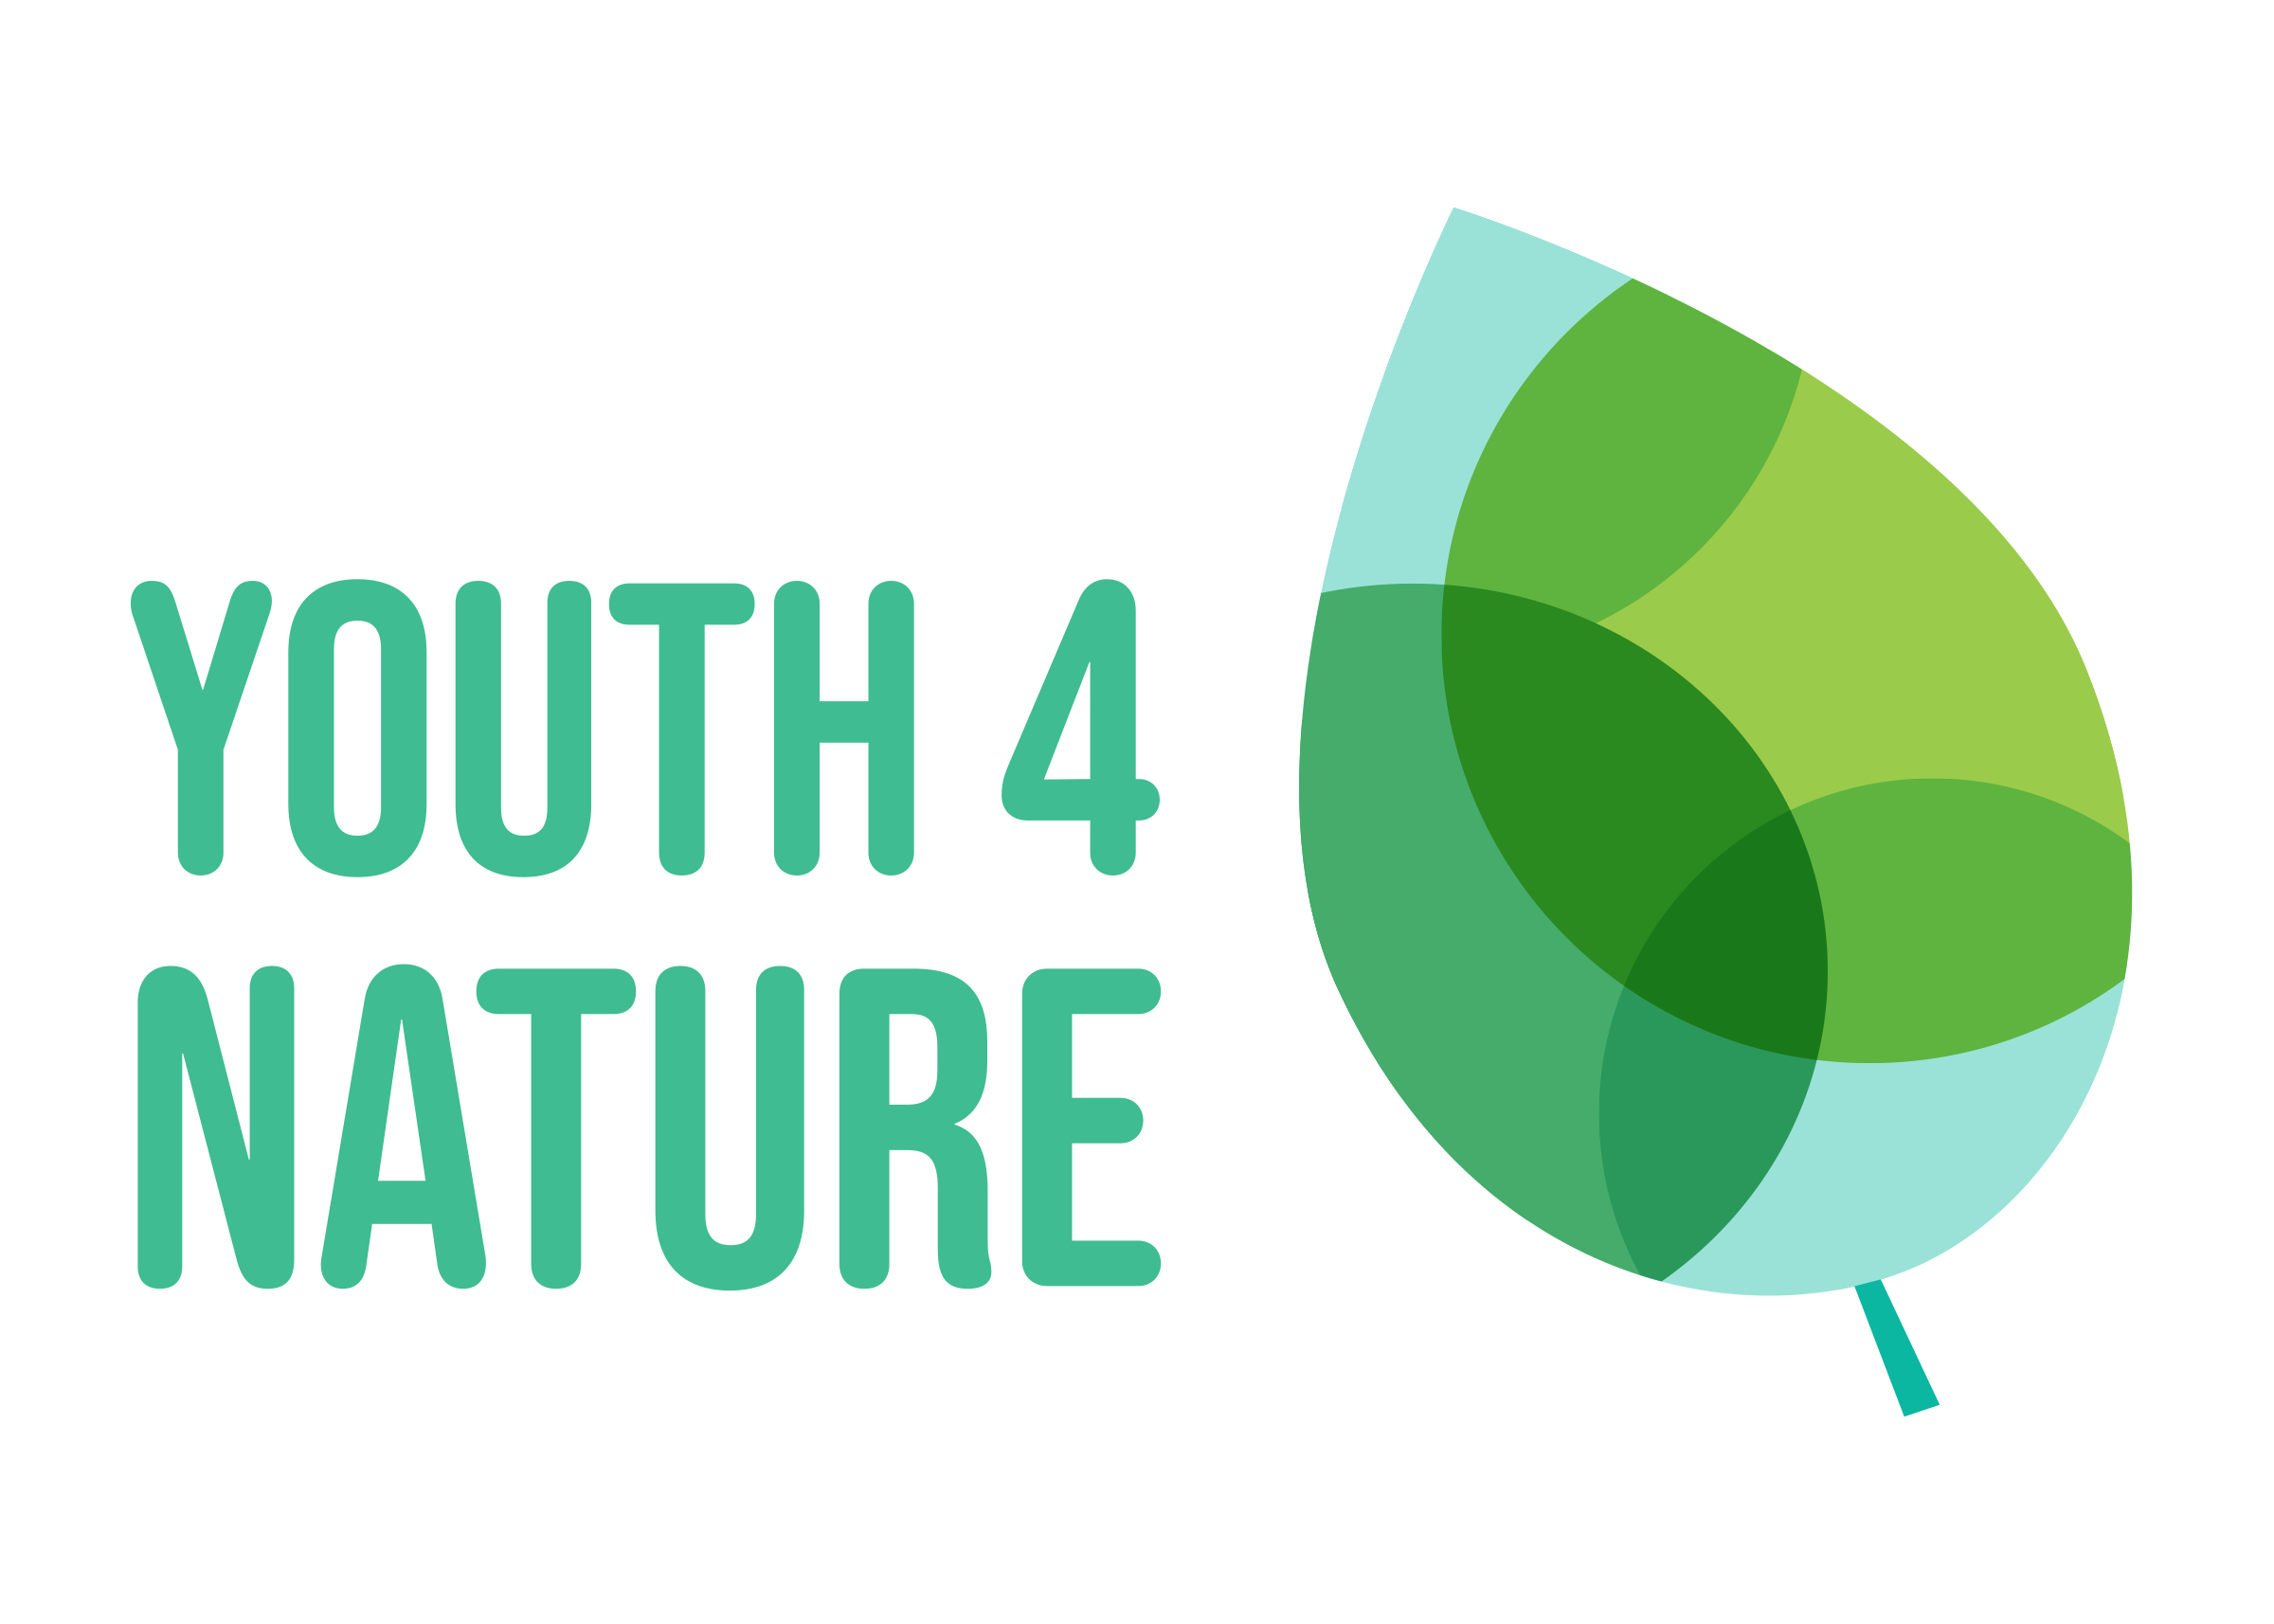 Youth 4 Nature